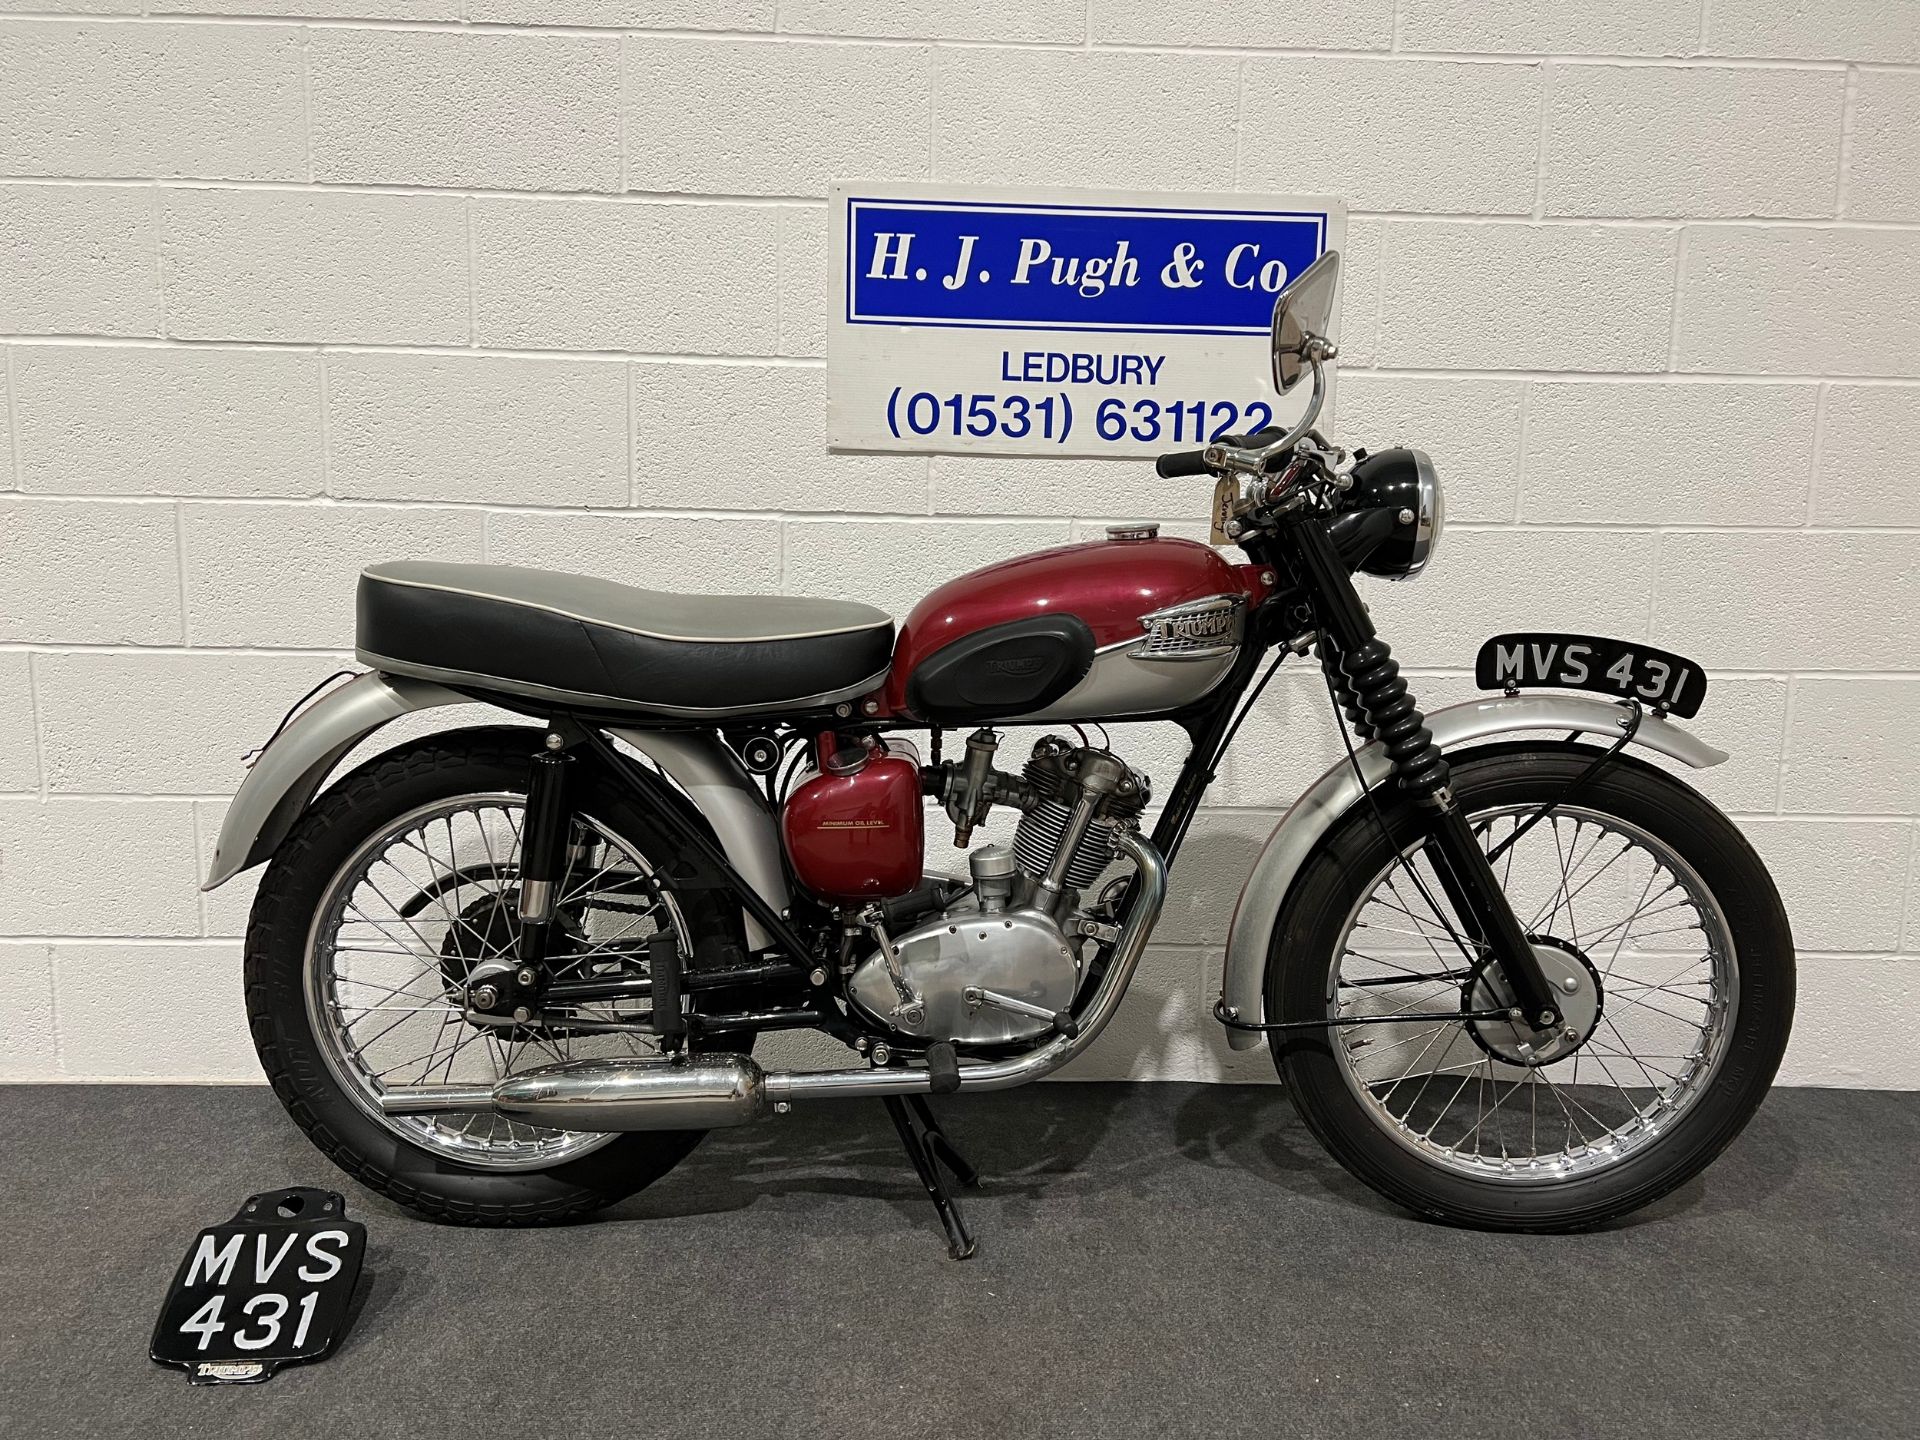 Triumph Tiger cub motorcycle. 1961. 199cc. Frame no. T-76741 Engine no. T2076741 Property of a - Image 7 of 7